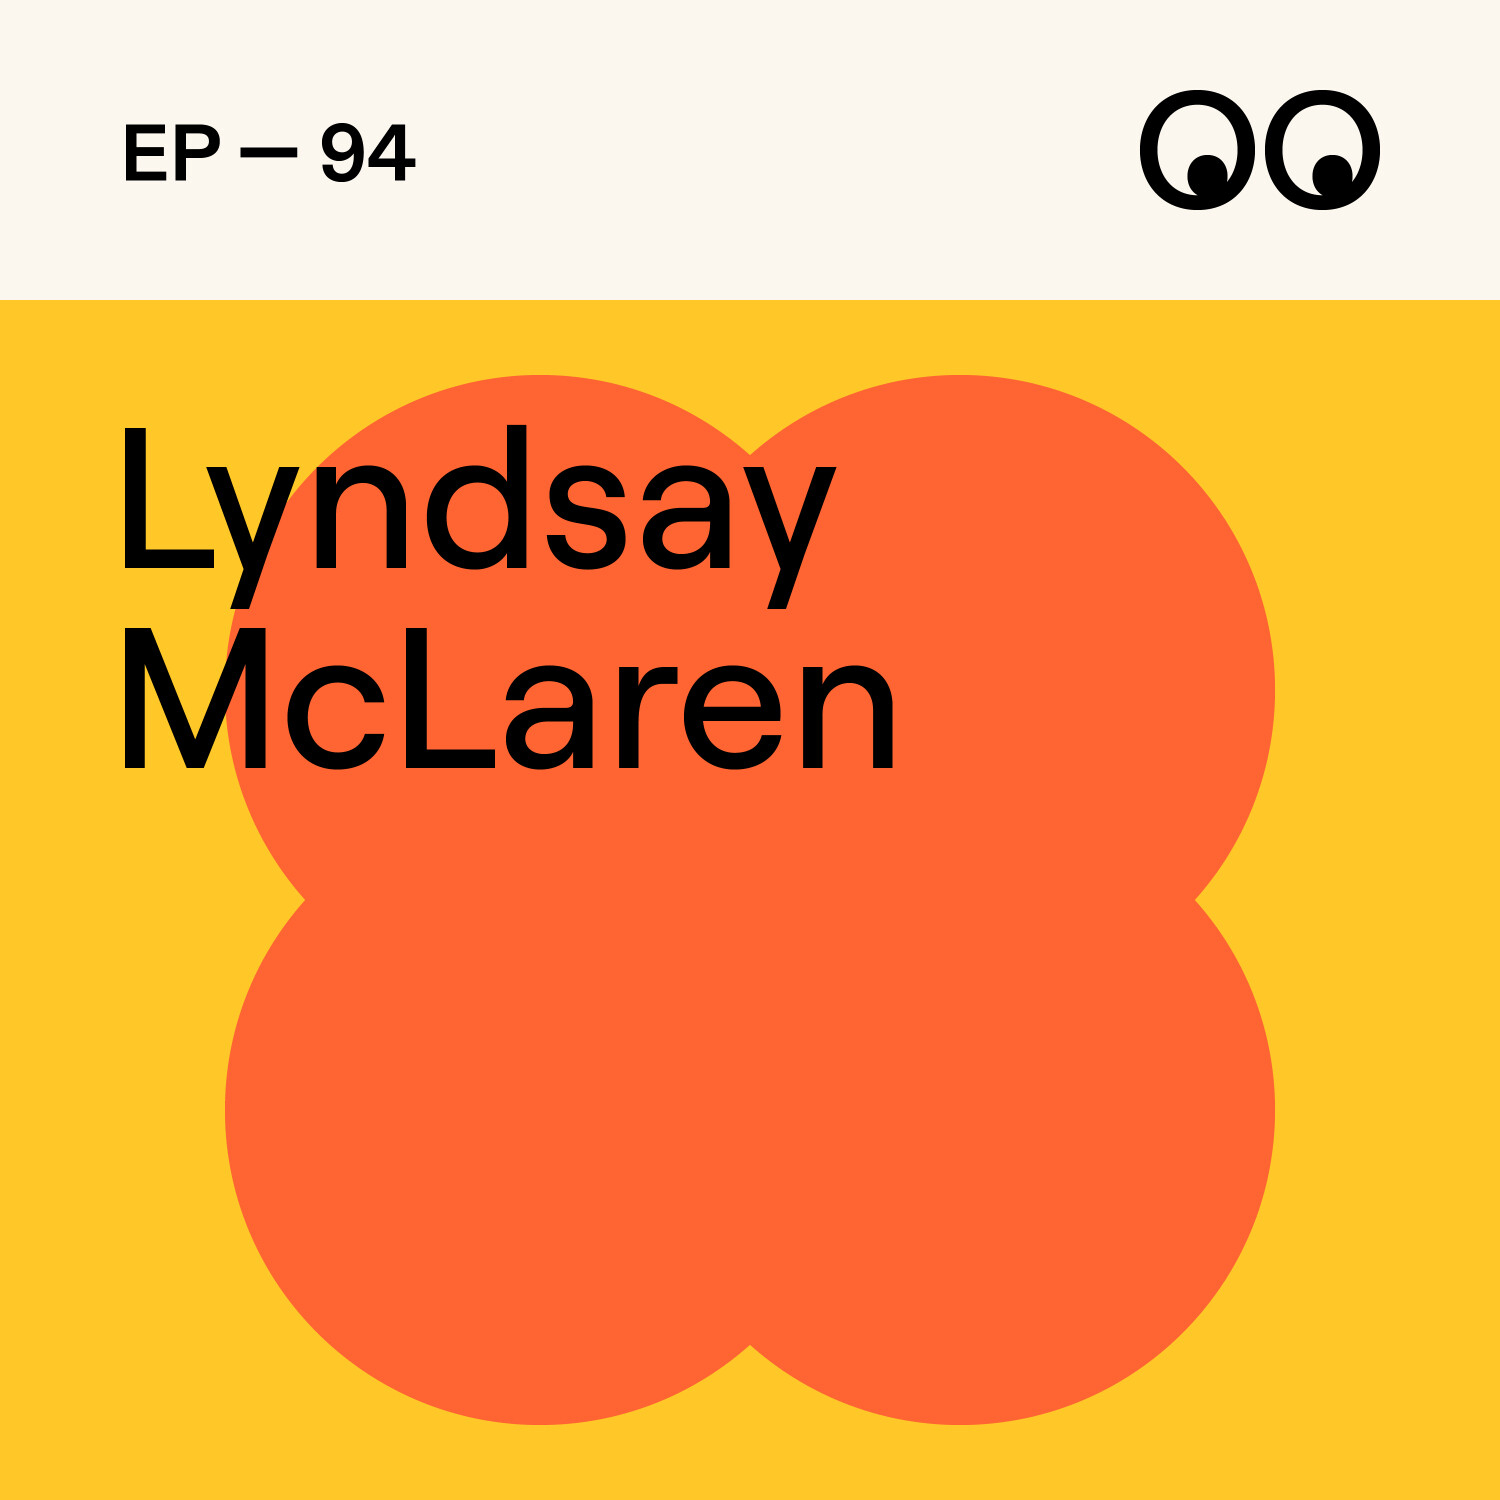 Creating a Neighbourhood Skate Club to tackle sexism & women's issues, with Lyndsay McLaren